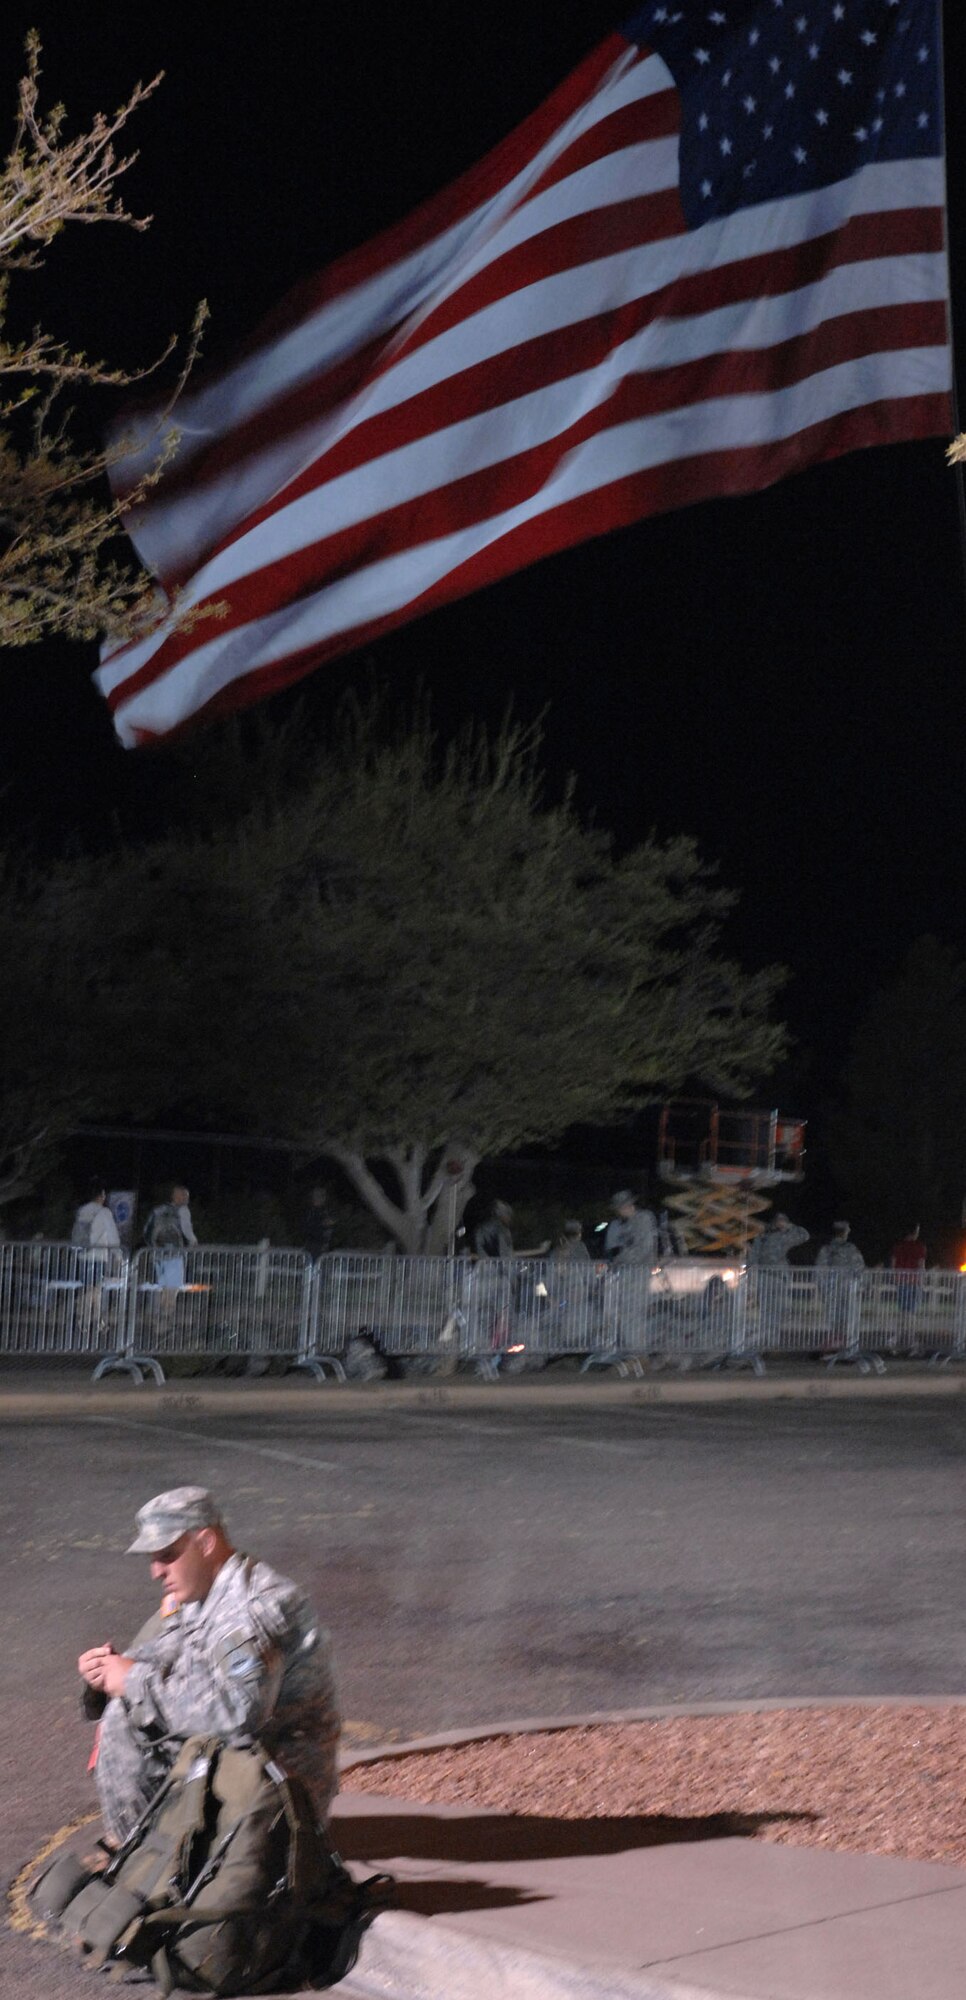 WHITE SANDS MISSILE RANGE, N.M. - A lone Soldier sits on a curb before beginning the 19th Annual Bataan Memorial Death March on March 30. More than 4,400 runners and marchers participated in the 26.2 or 15-mile run/walk. (U.S. Air Force photo by Airman 1st Class Evelyn Chavez)